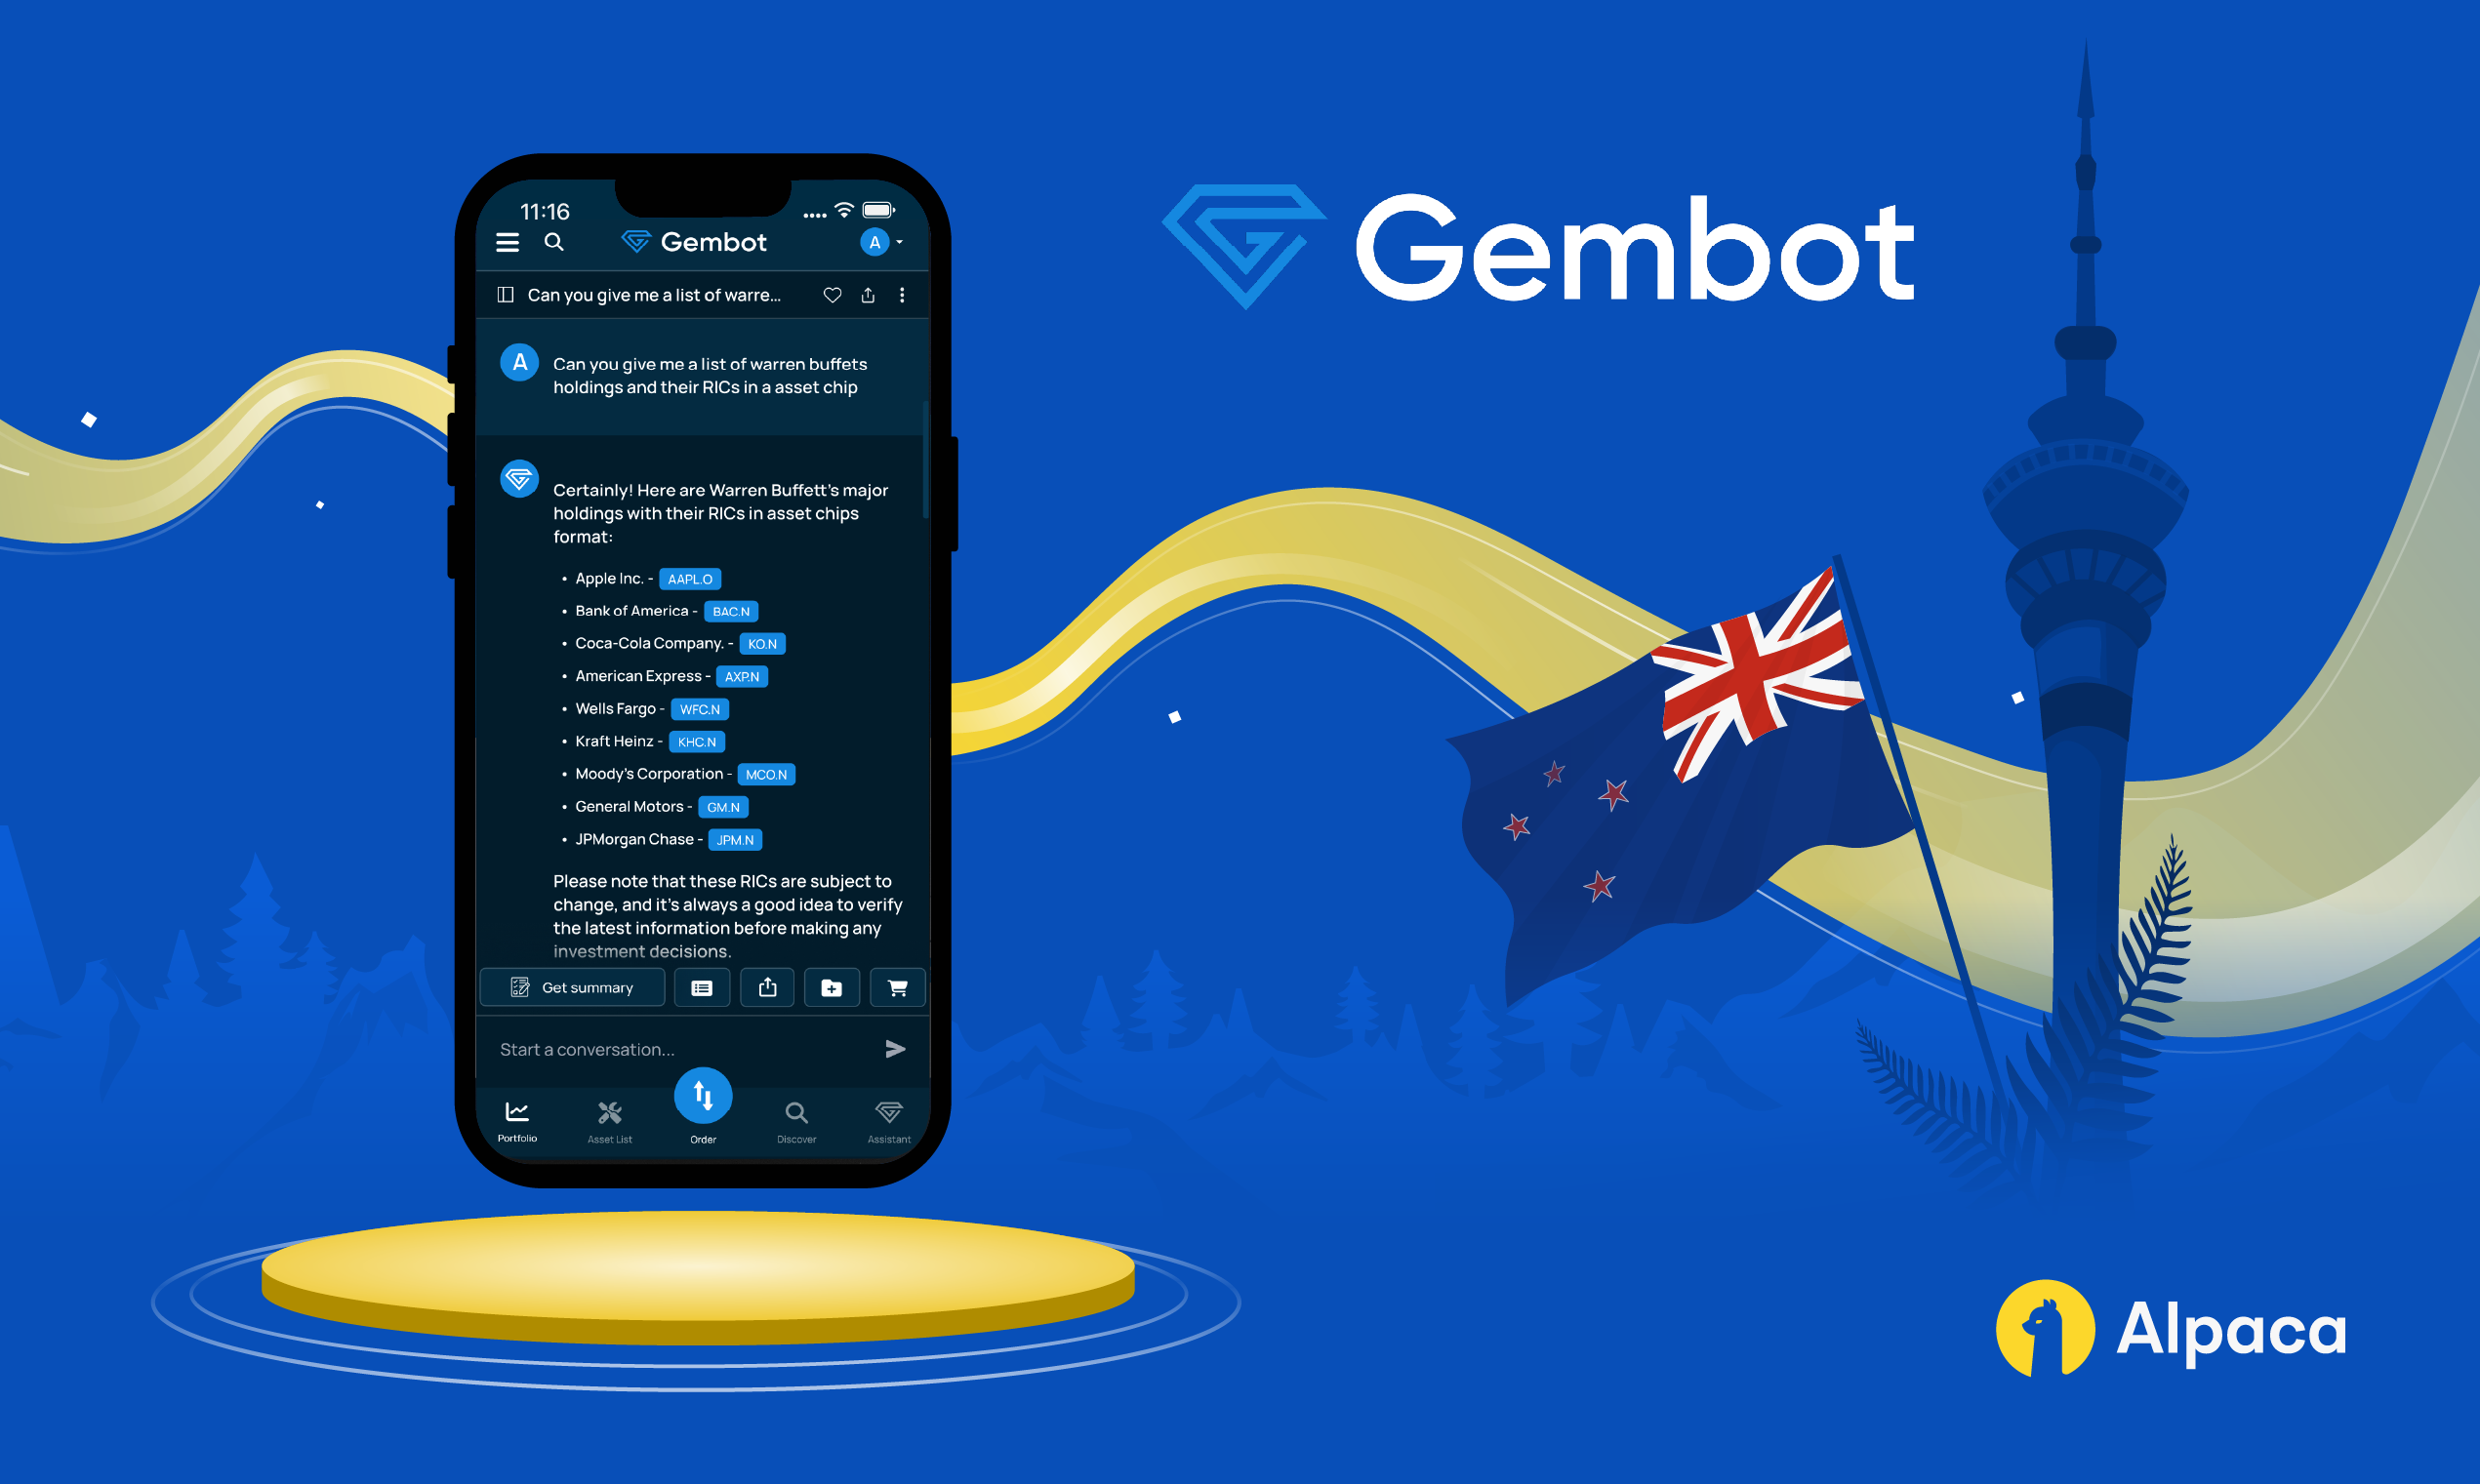 Gembot: Simplifying the Complex for Kiwi Investors